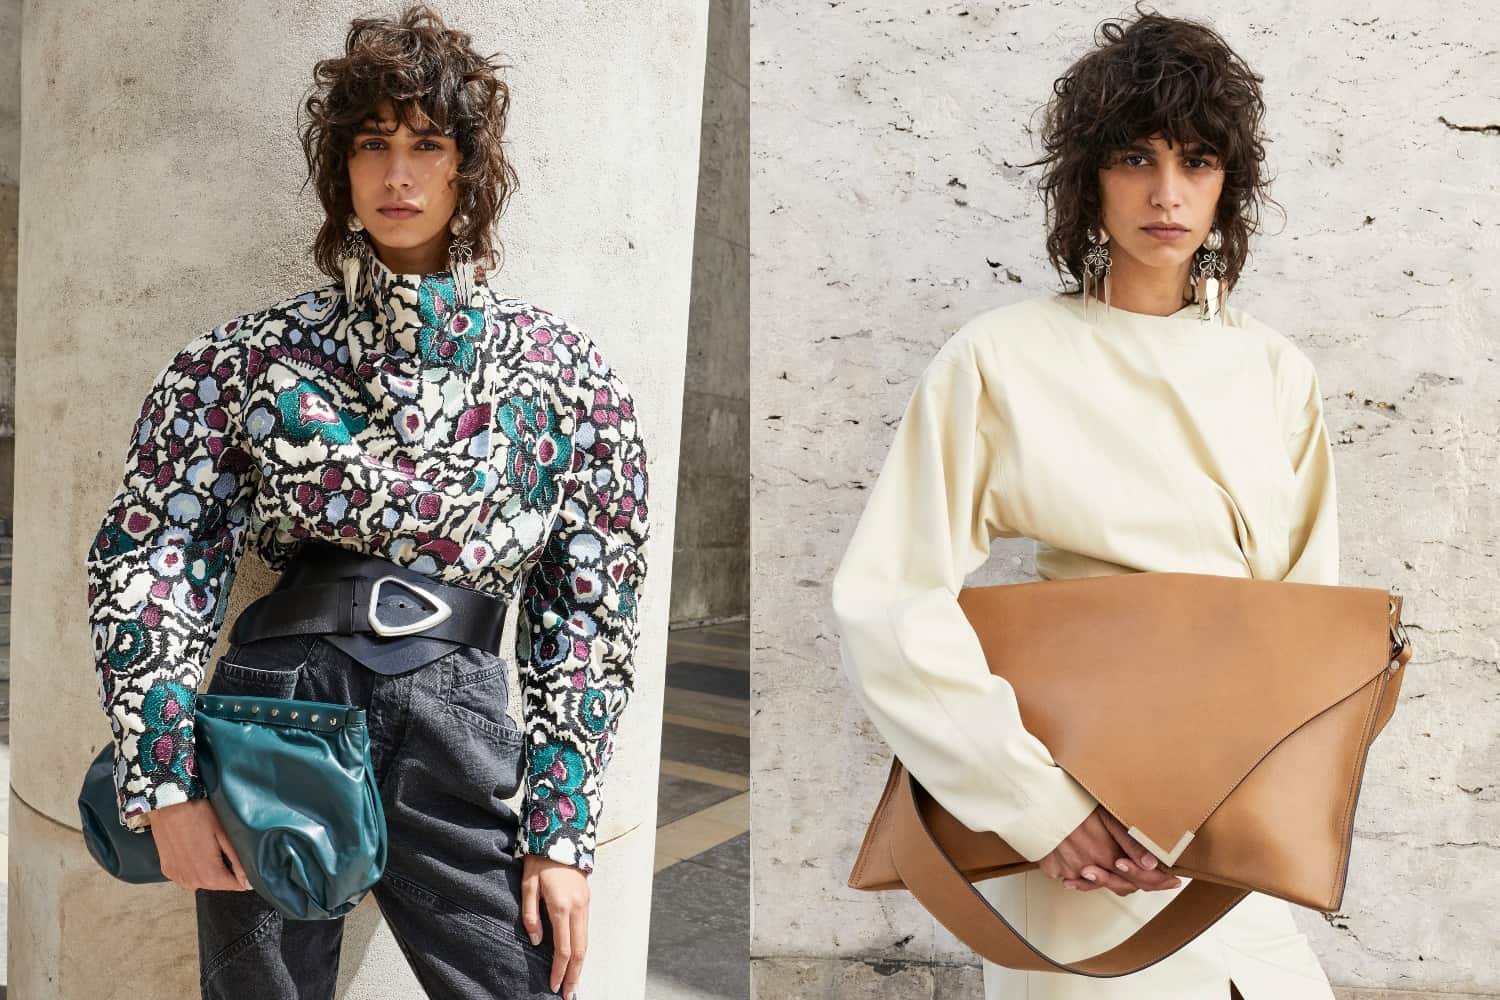 Isabel Marant's Latest Campaign the Fall Inspiration You Need